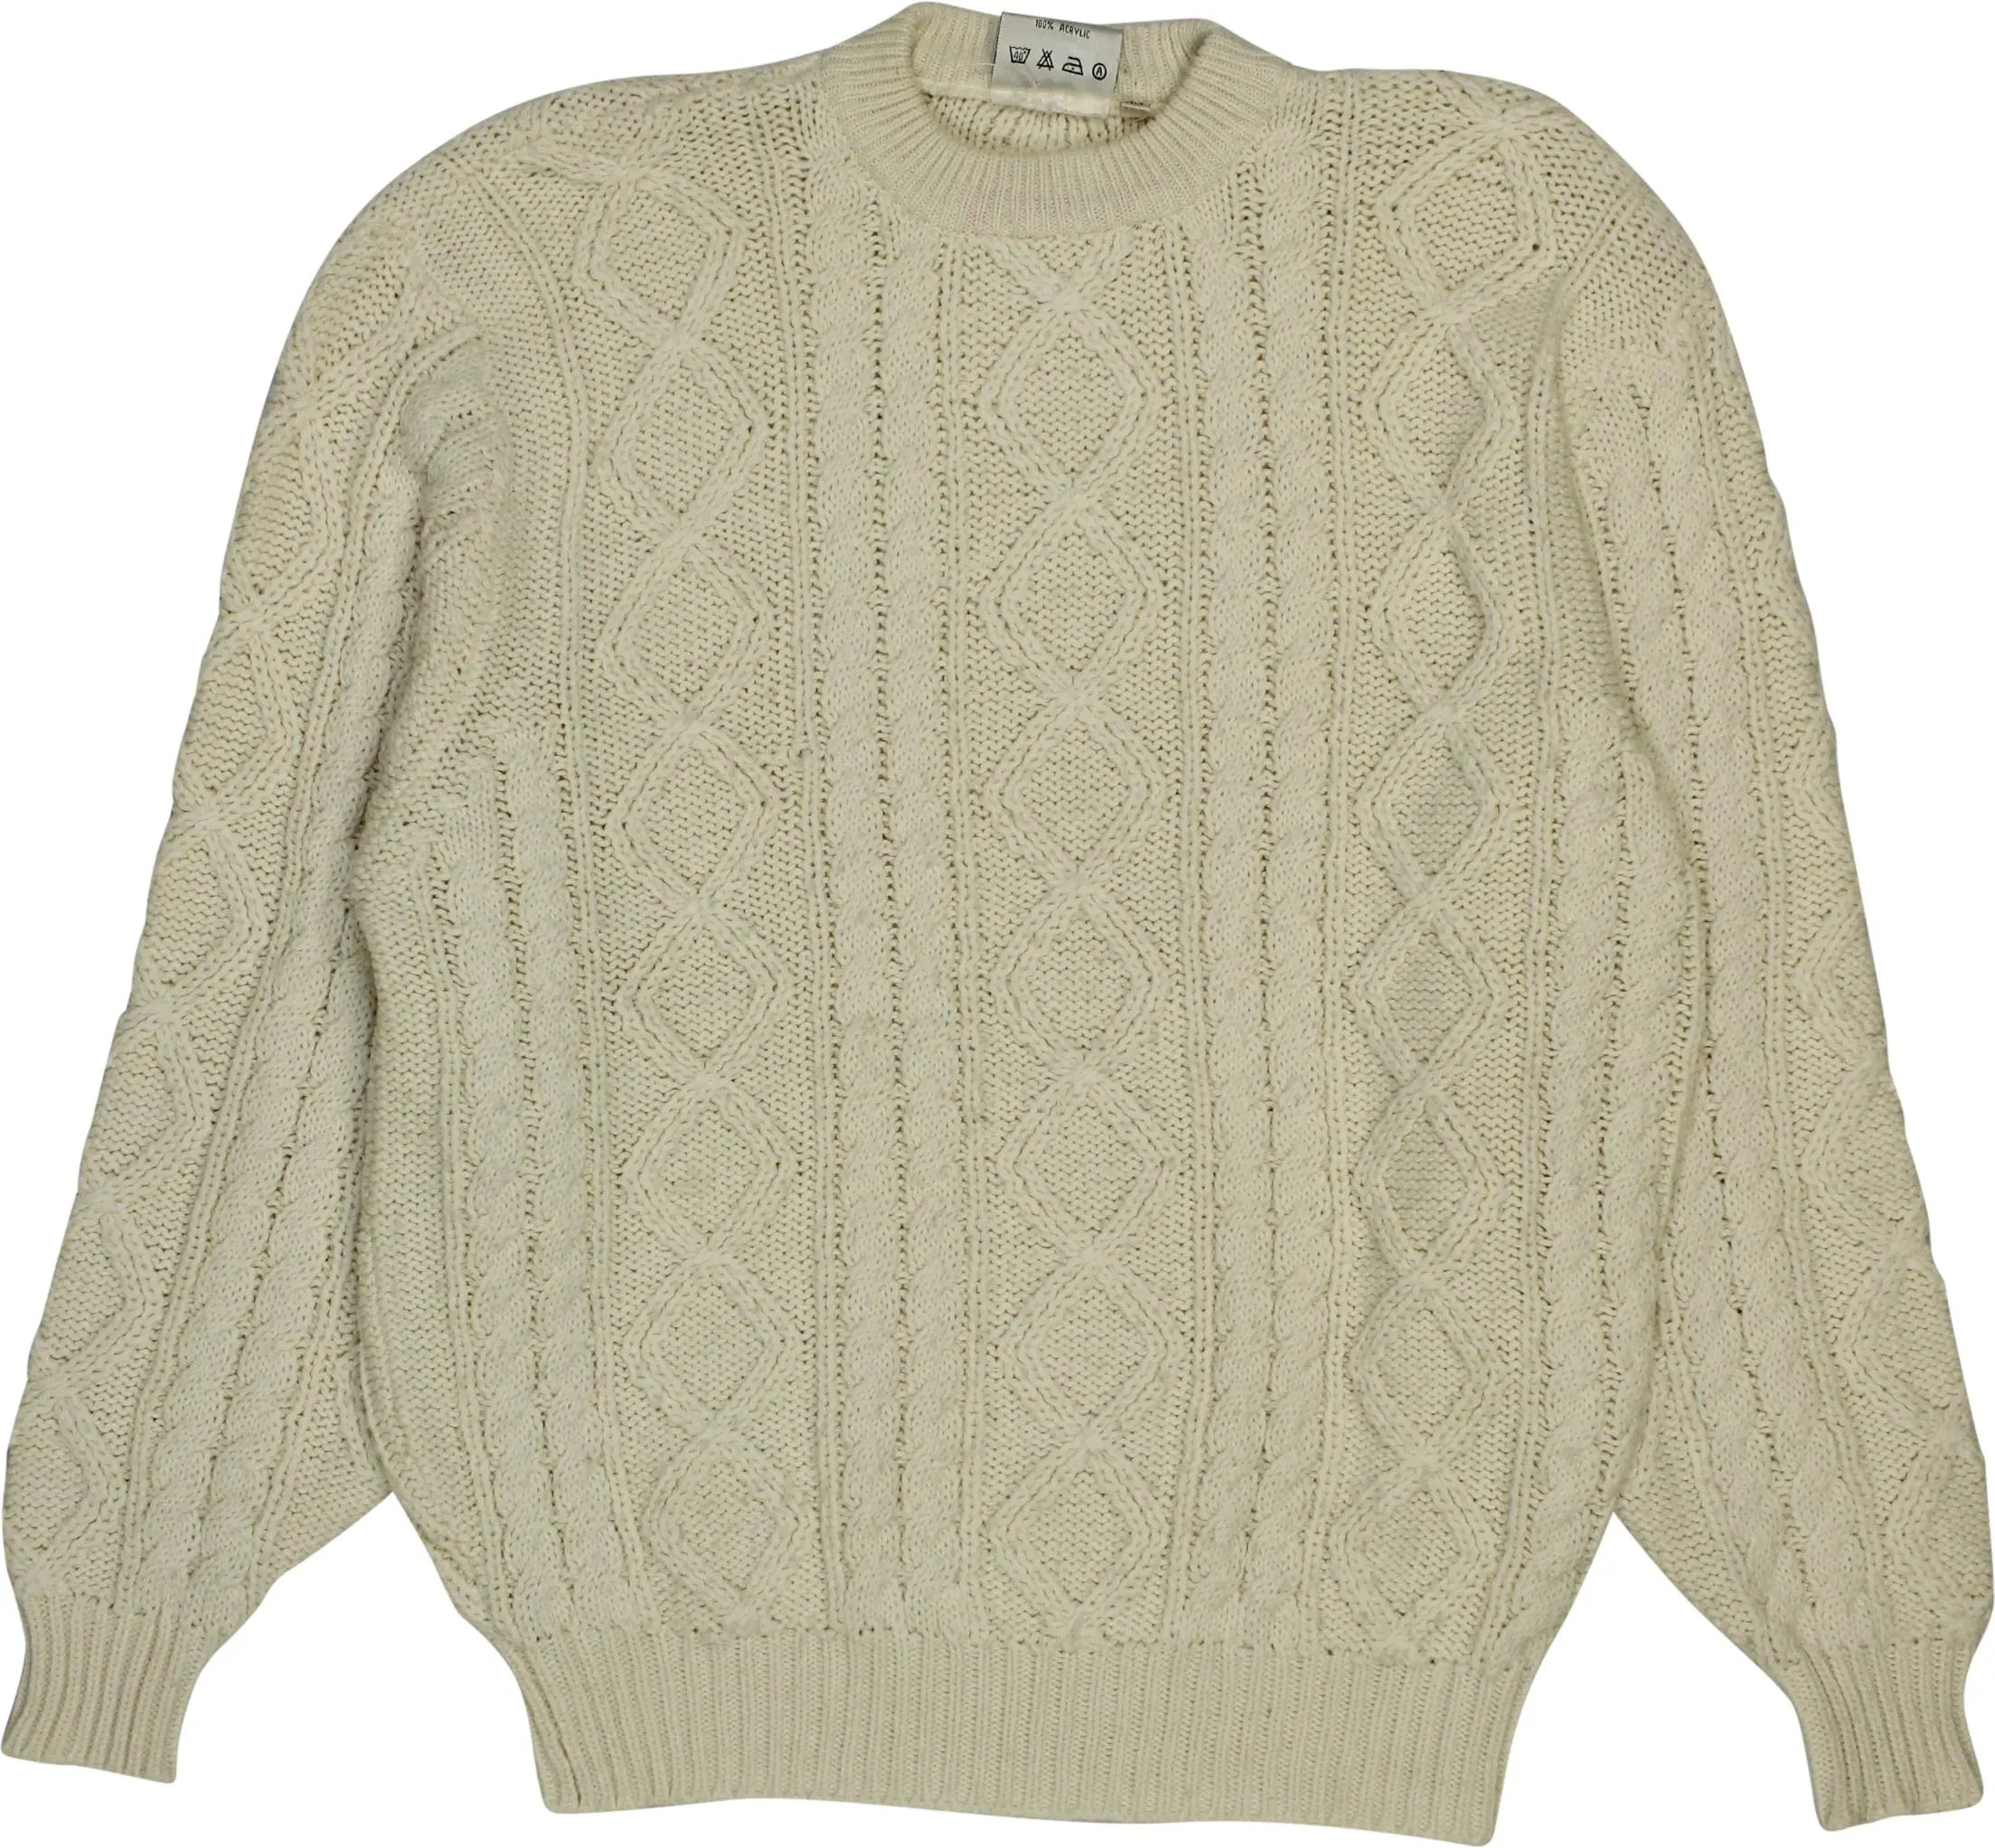 Vintage Cable Knitwear for men